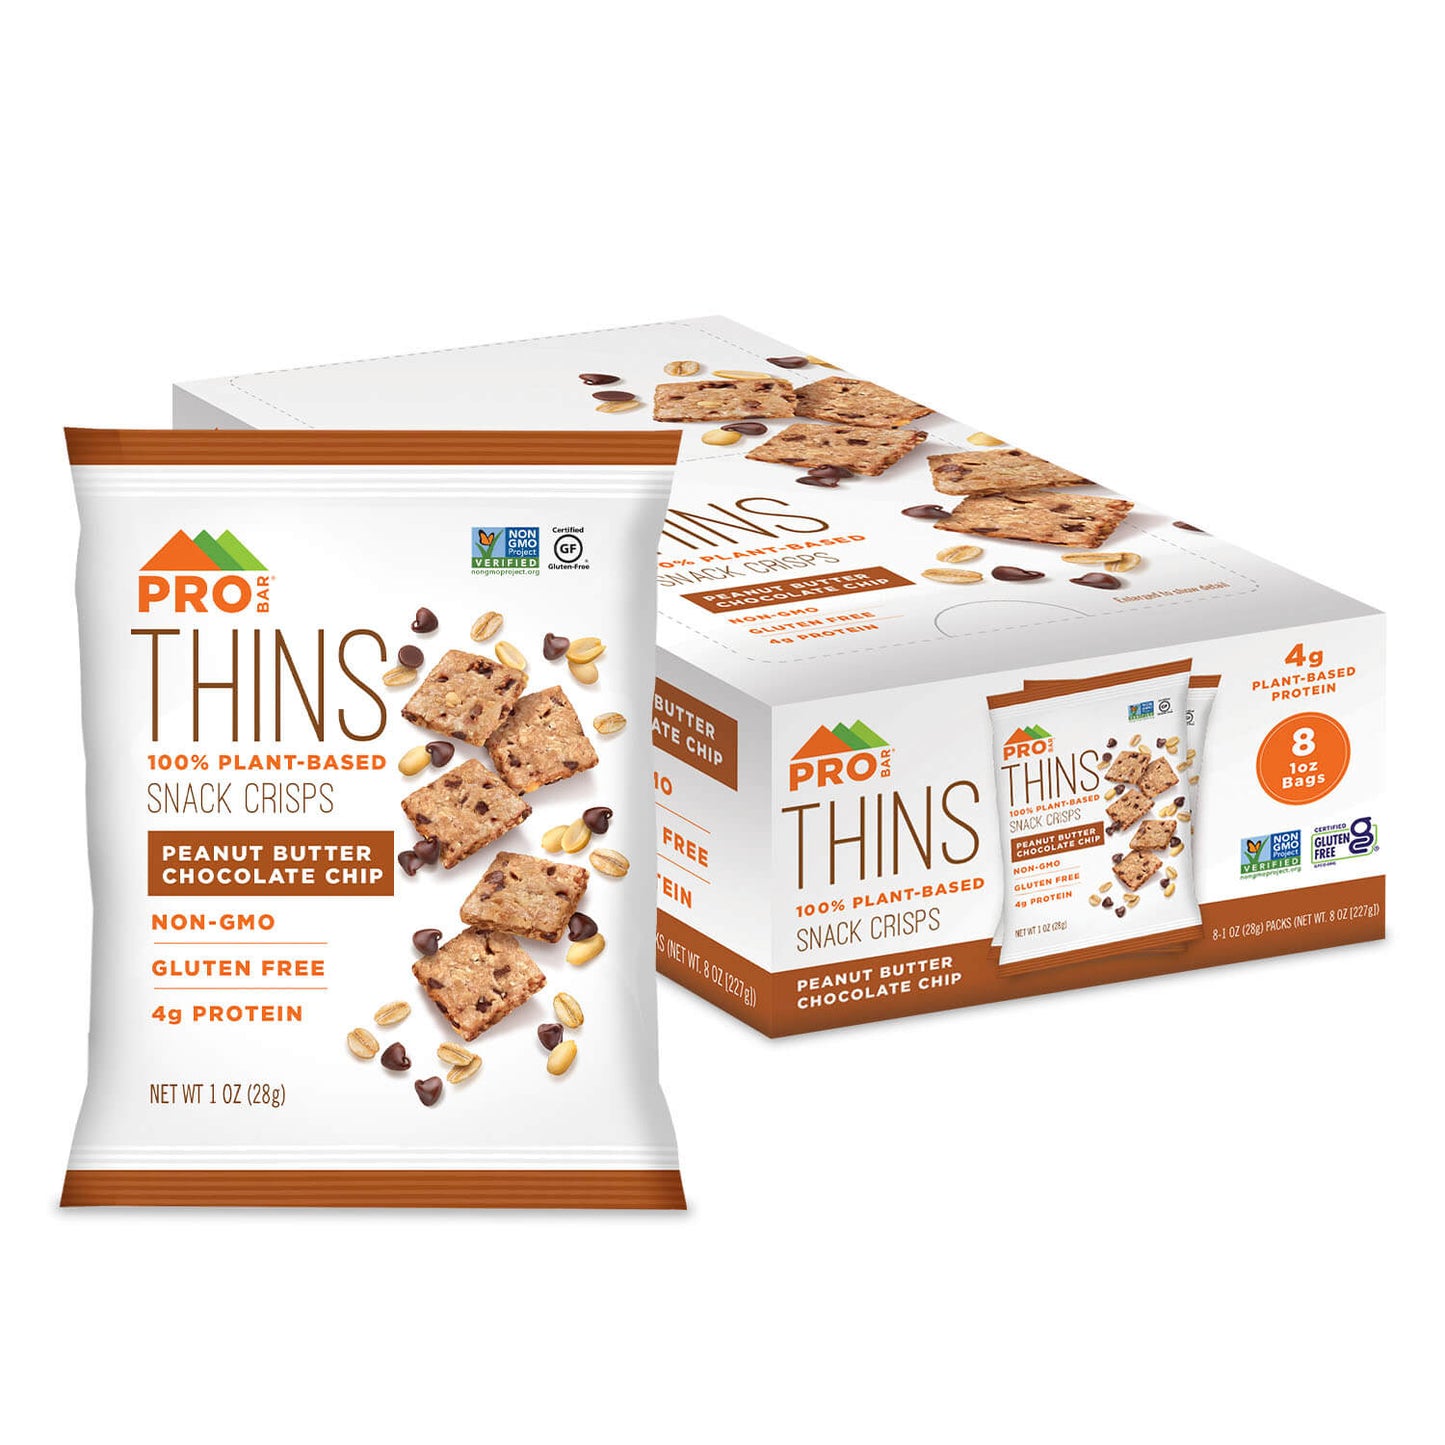 Peanut Butter Chocolate Chip THINS 1 oz. 8 Pack